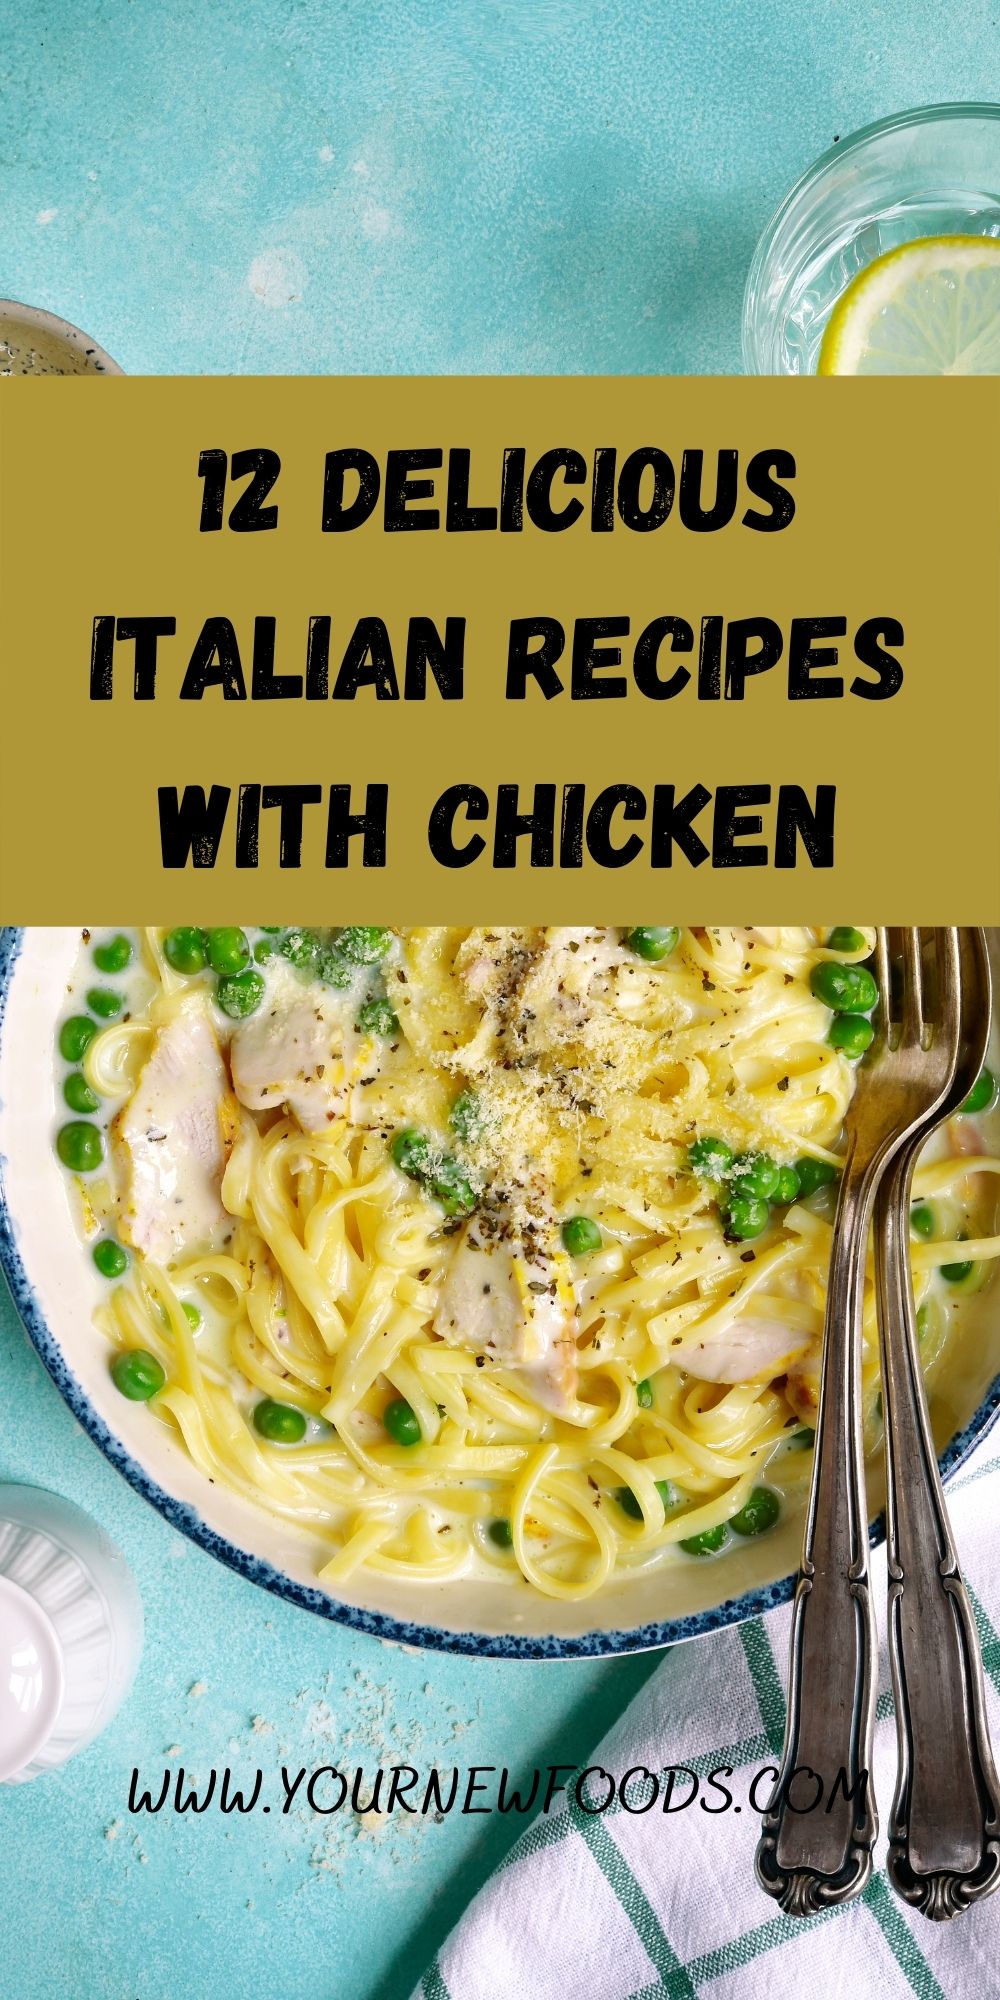 Italian recipes with Chicken carbonara in a white bowl on a blue surface